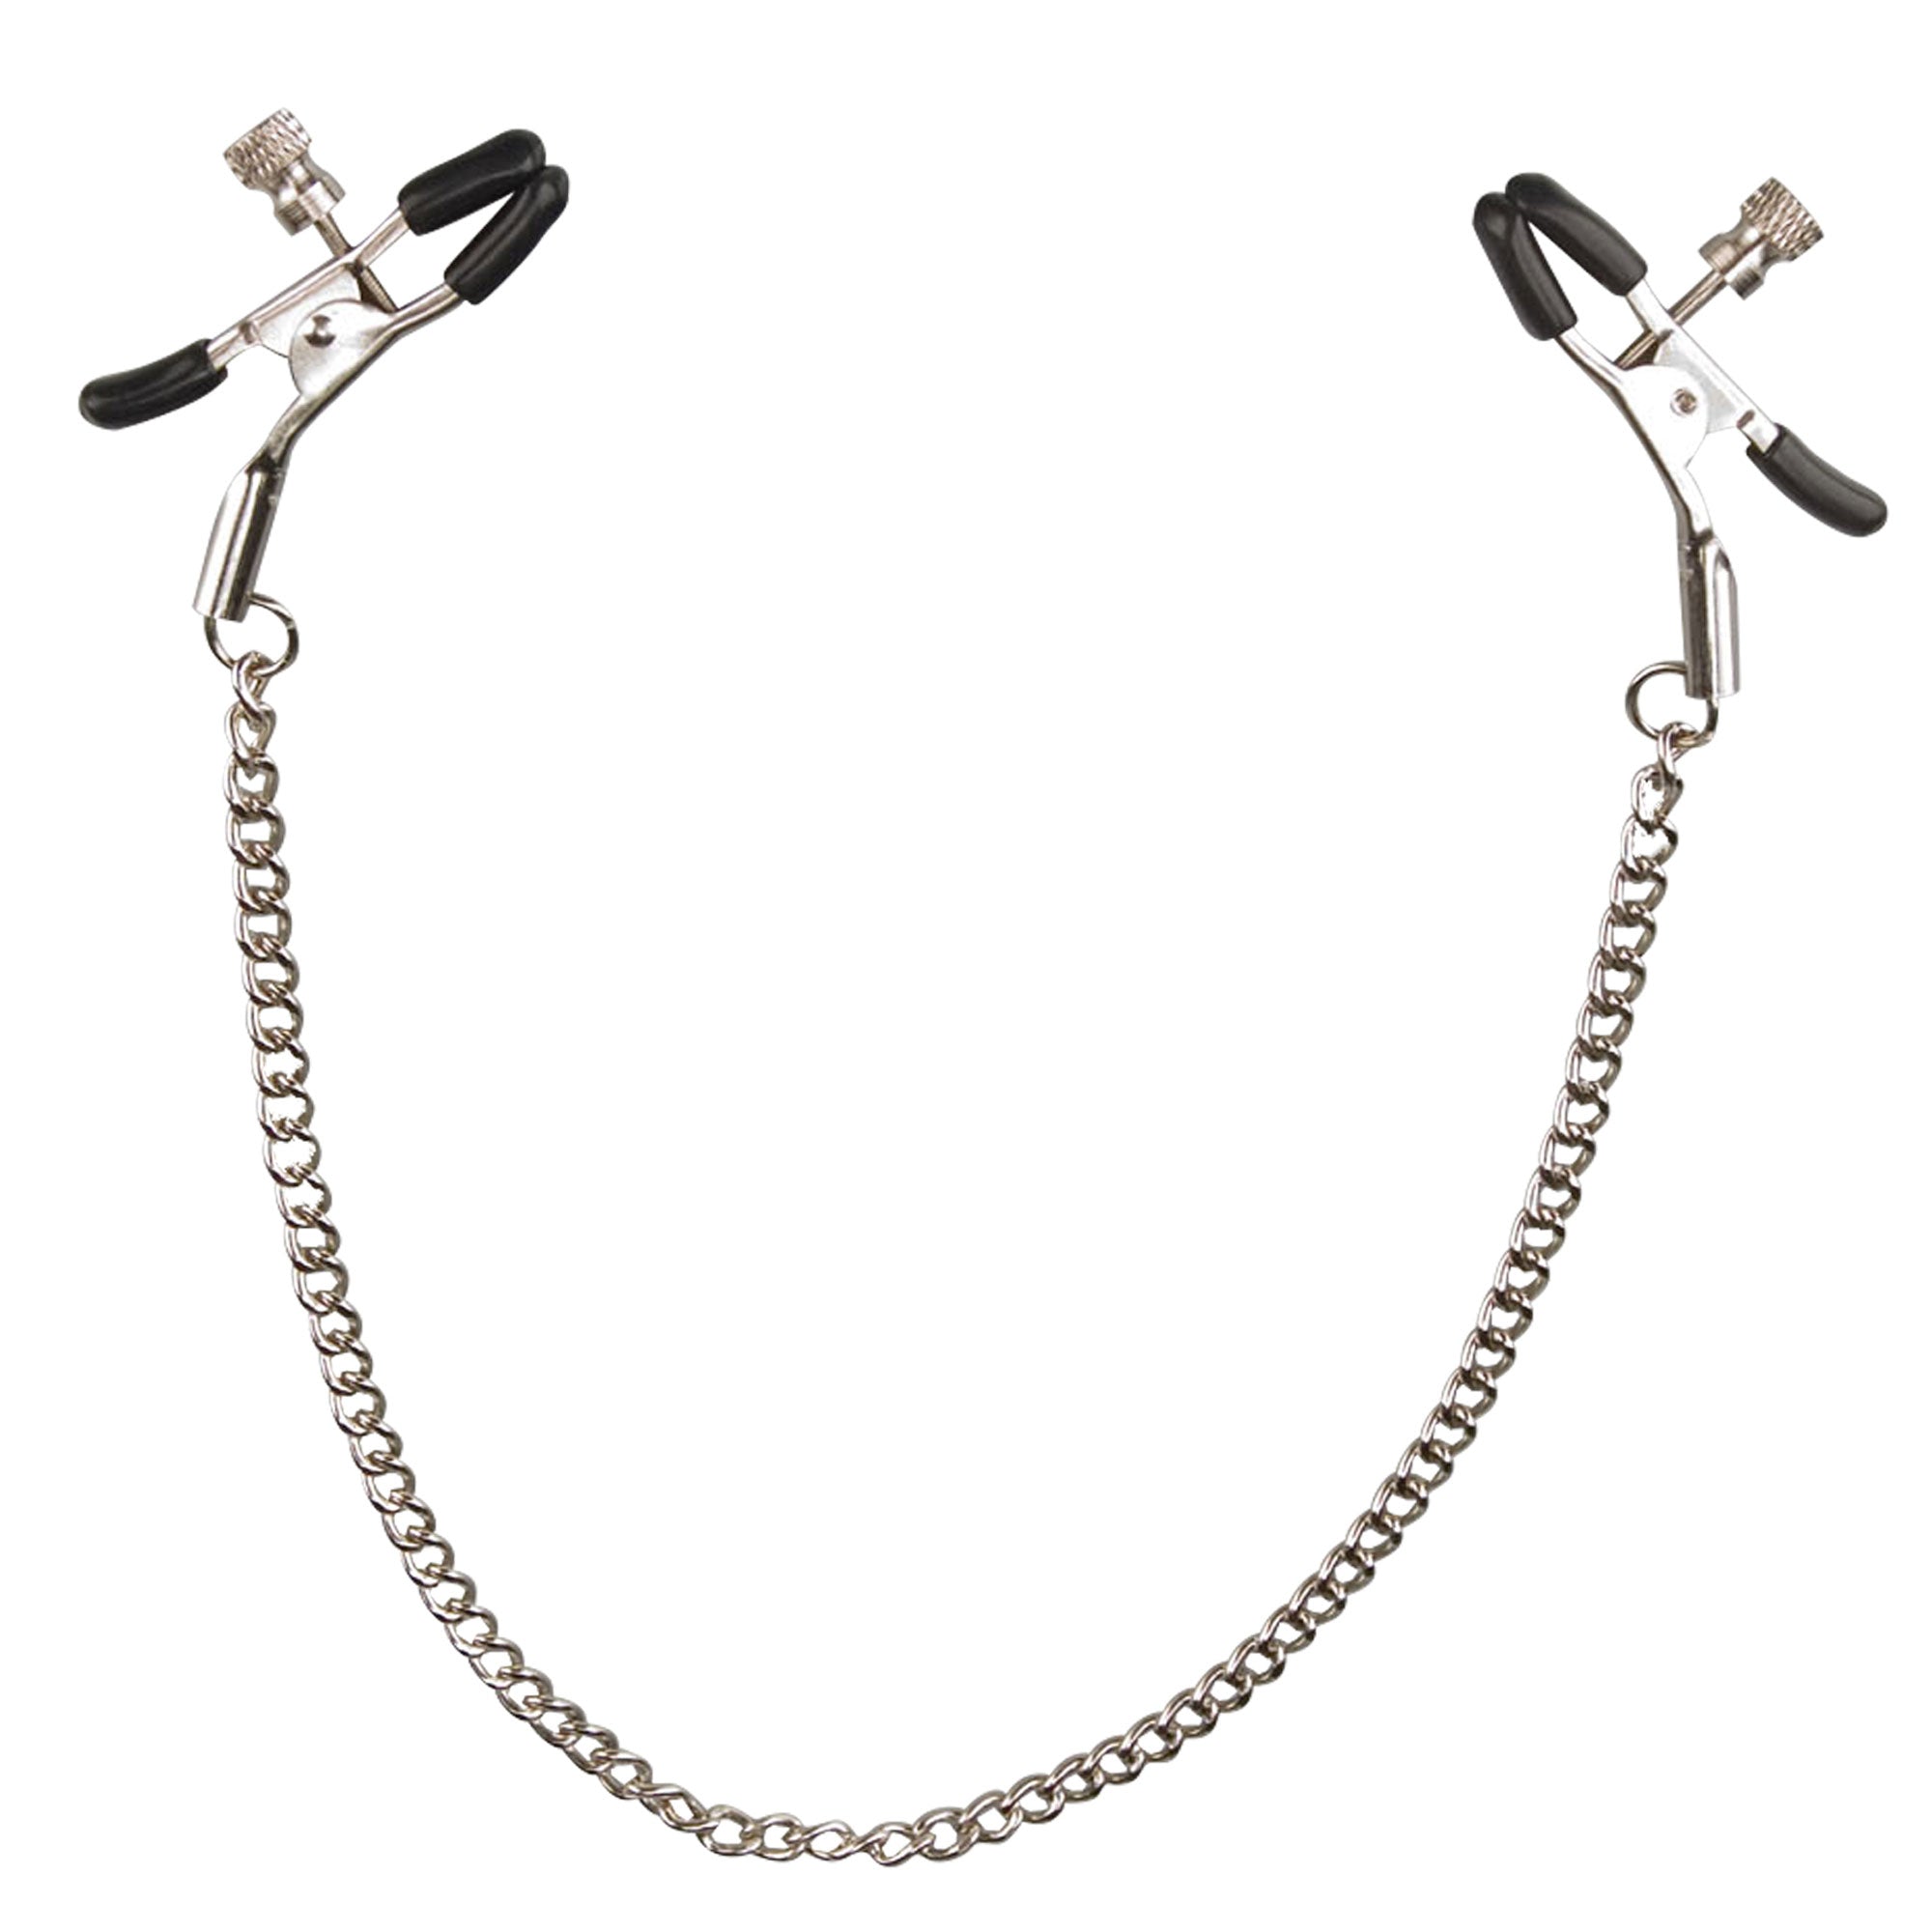 Lux Fetish Adjustable Nipple Clips with Chain at glastoy.com